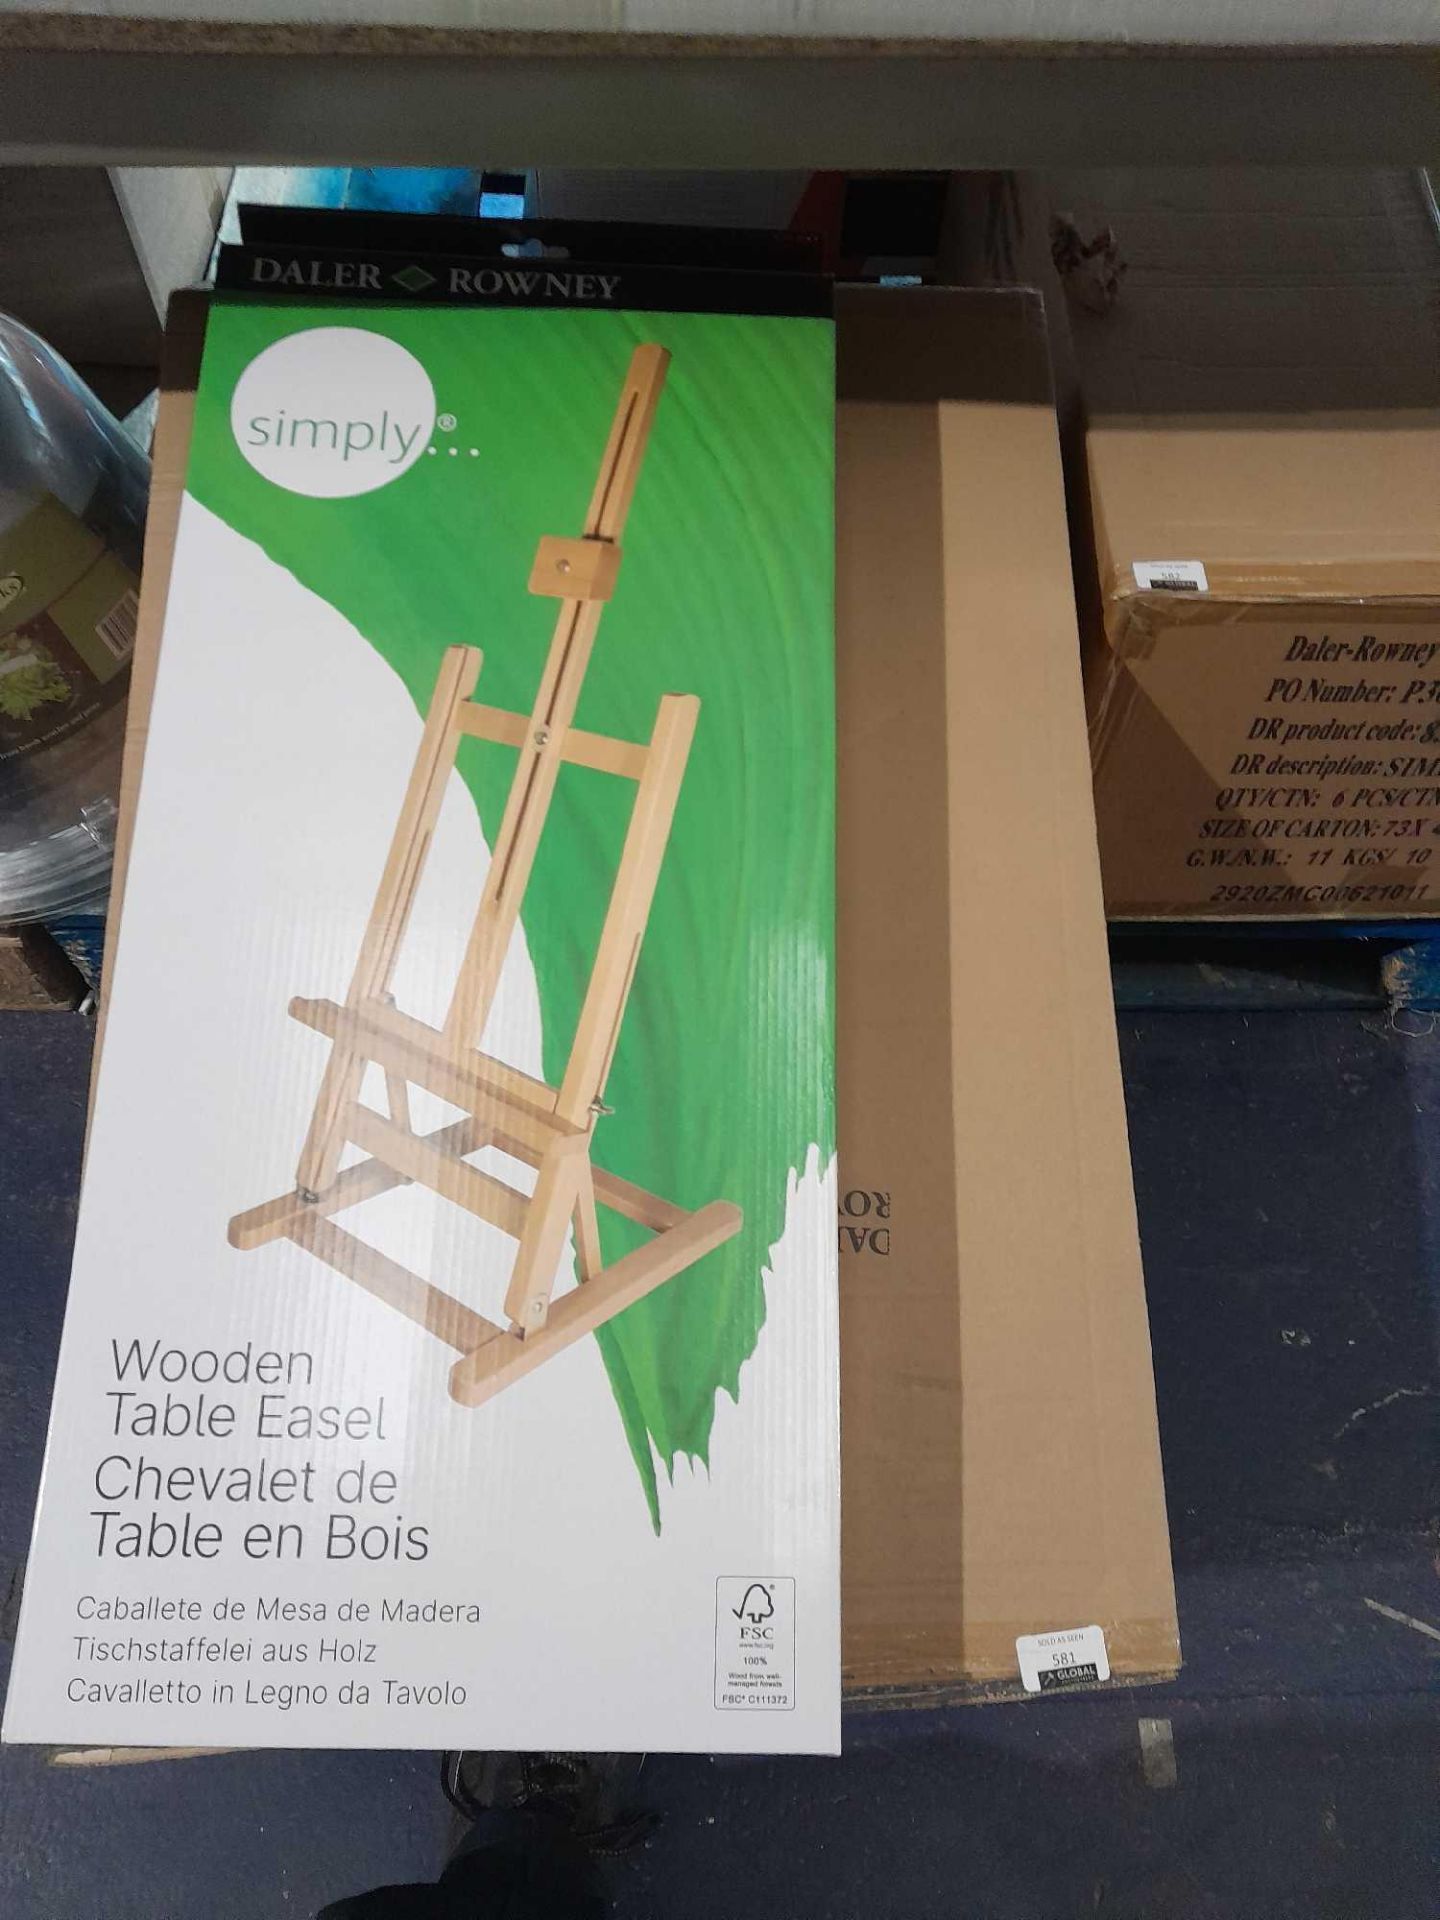 RRP £125 Box To Contain 5 Boxed Brand New Daler Rowney Wooden Table Easels - Image 2 of 2